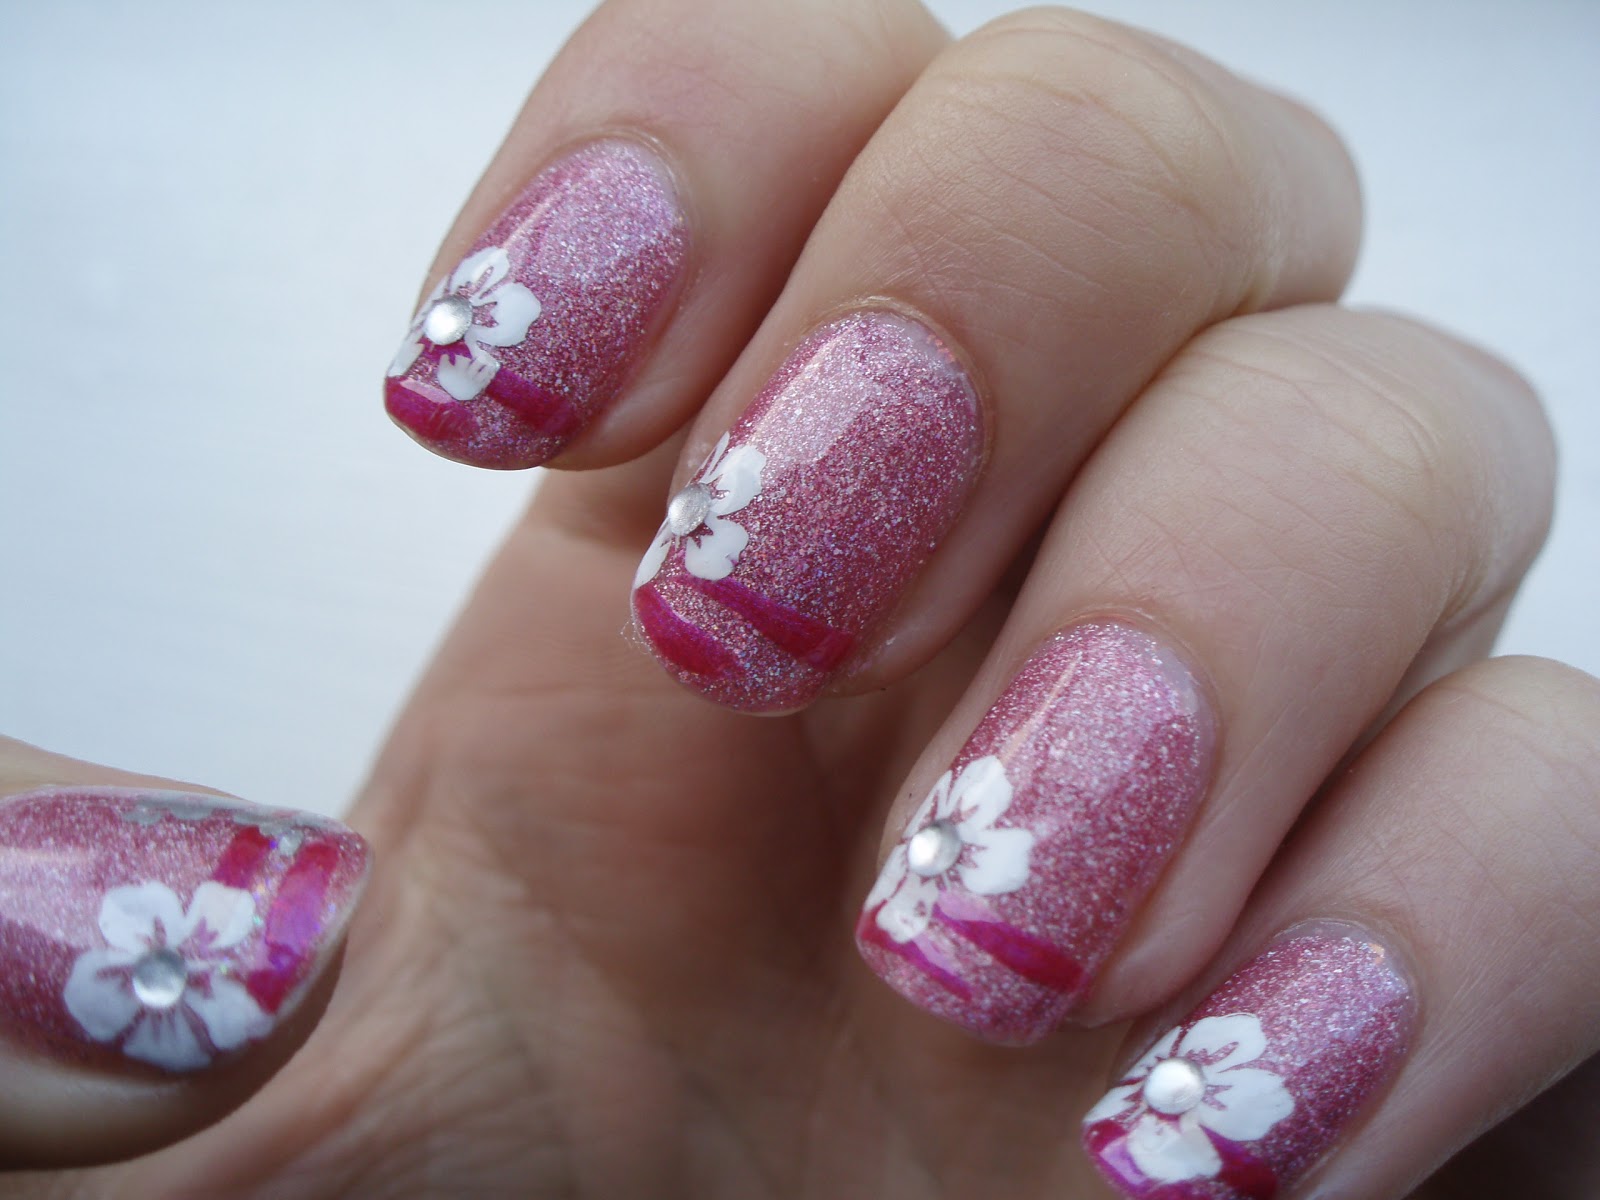 Clothes, Cosmetics and Chat: Monday's Manicure: Holographic Floral Nail Art